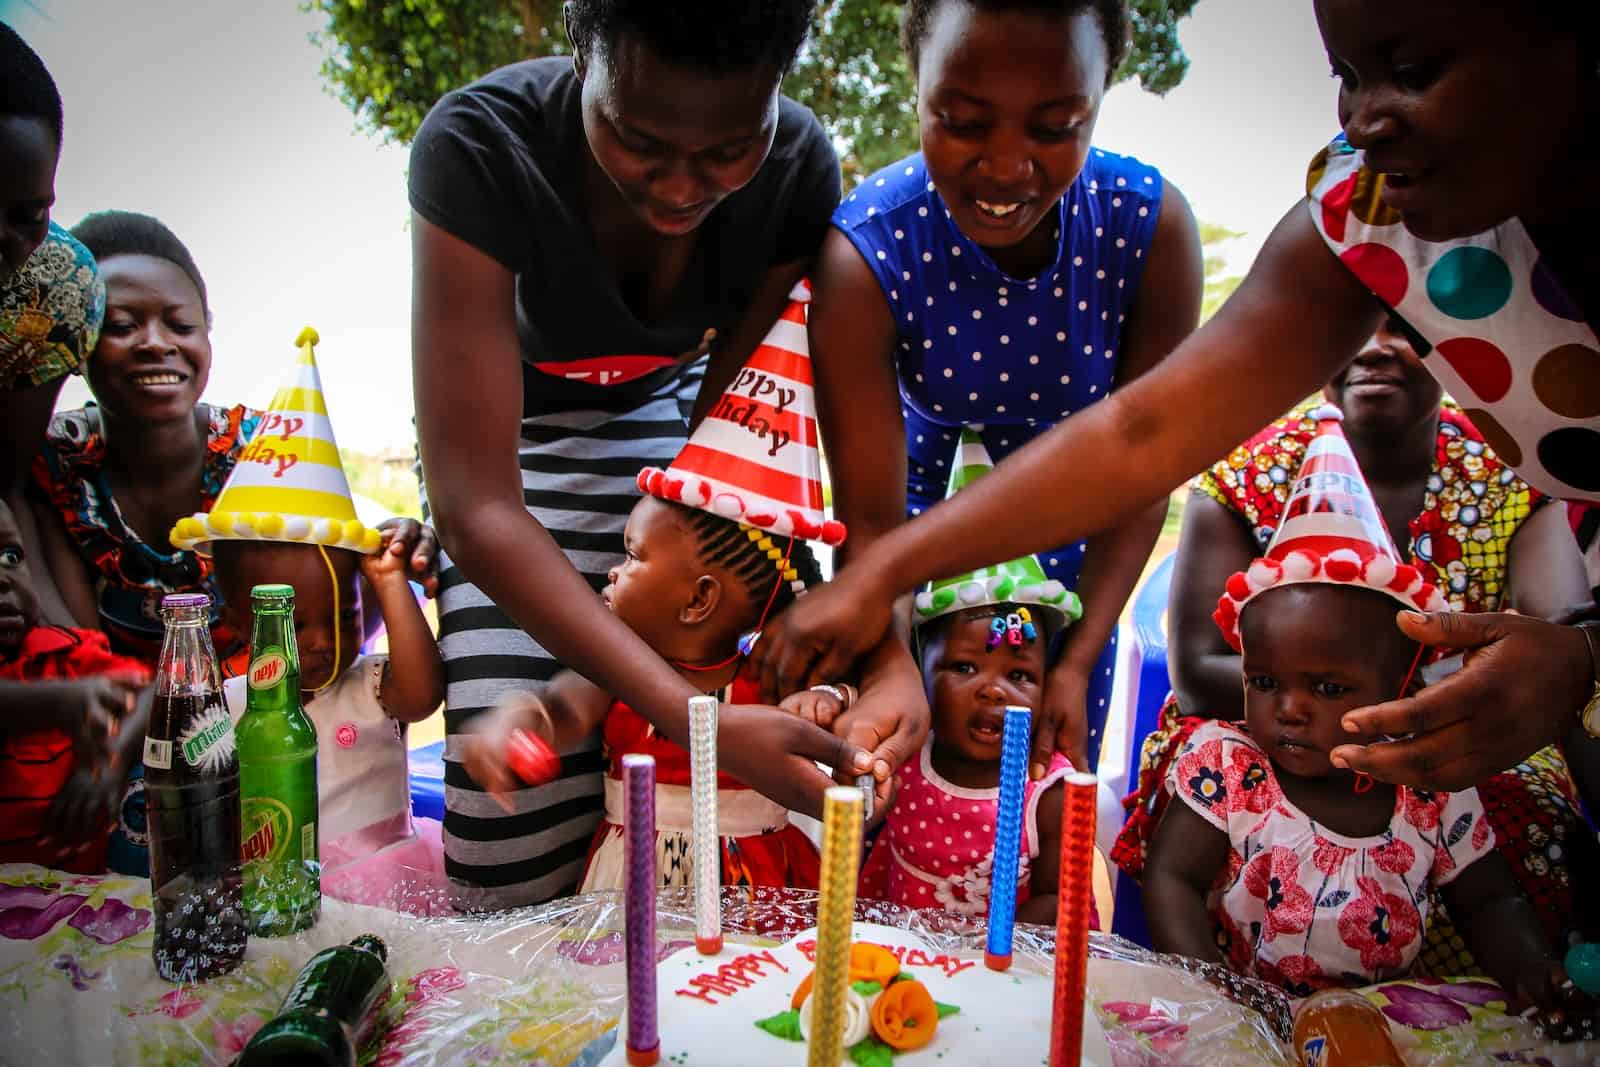 Three babies sit at a table with a cake in front of them to celebrate a birthday milestone. They are wearing party hats and women stand behind them, helping them.